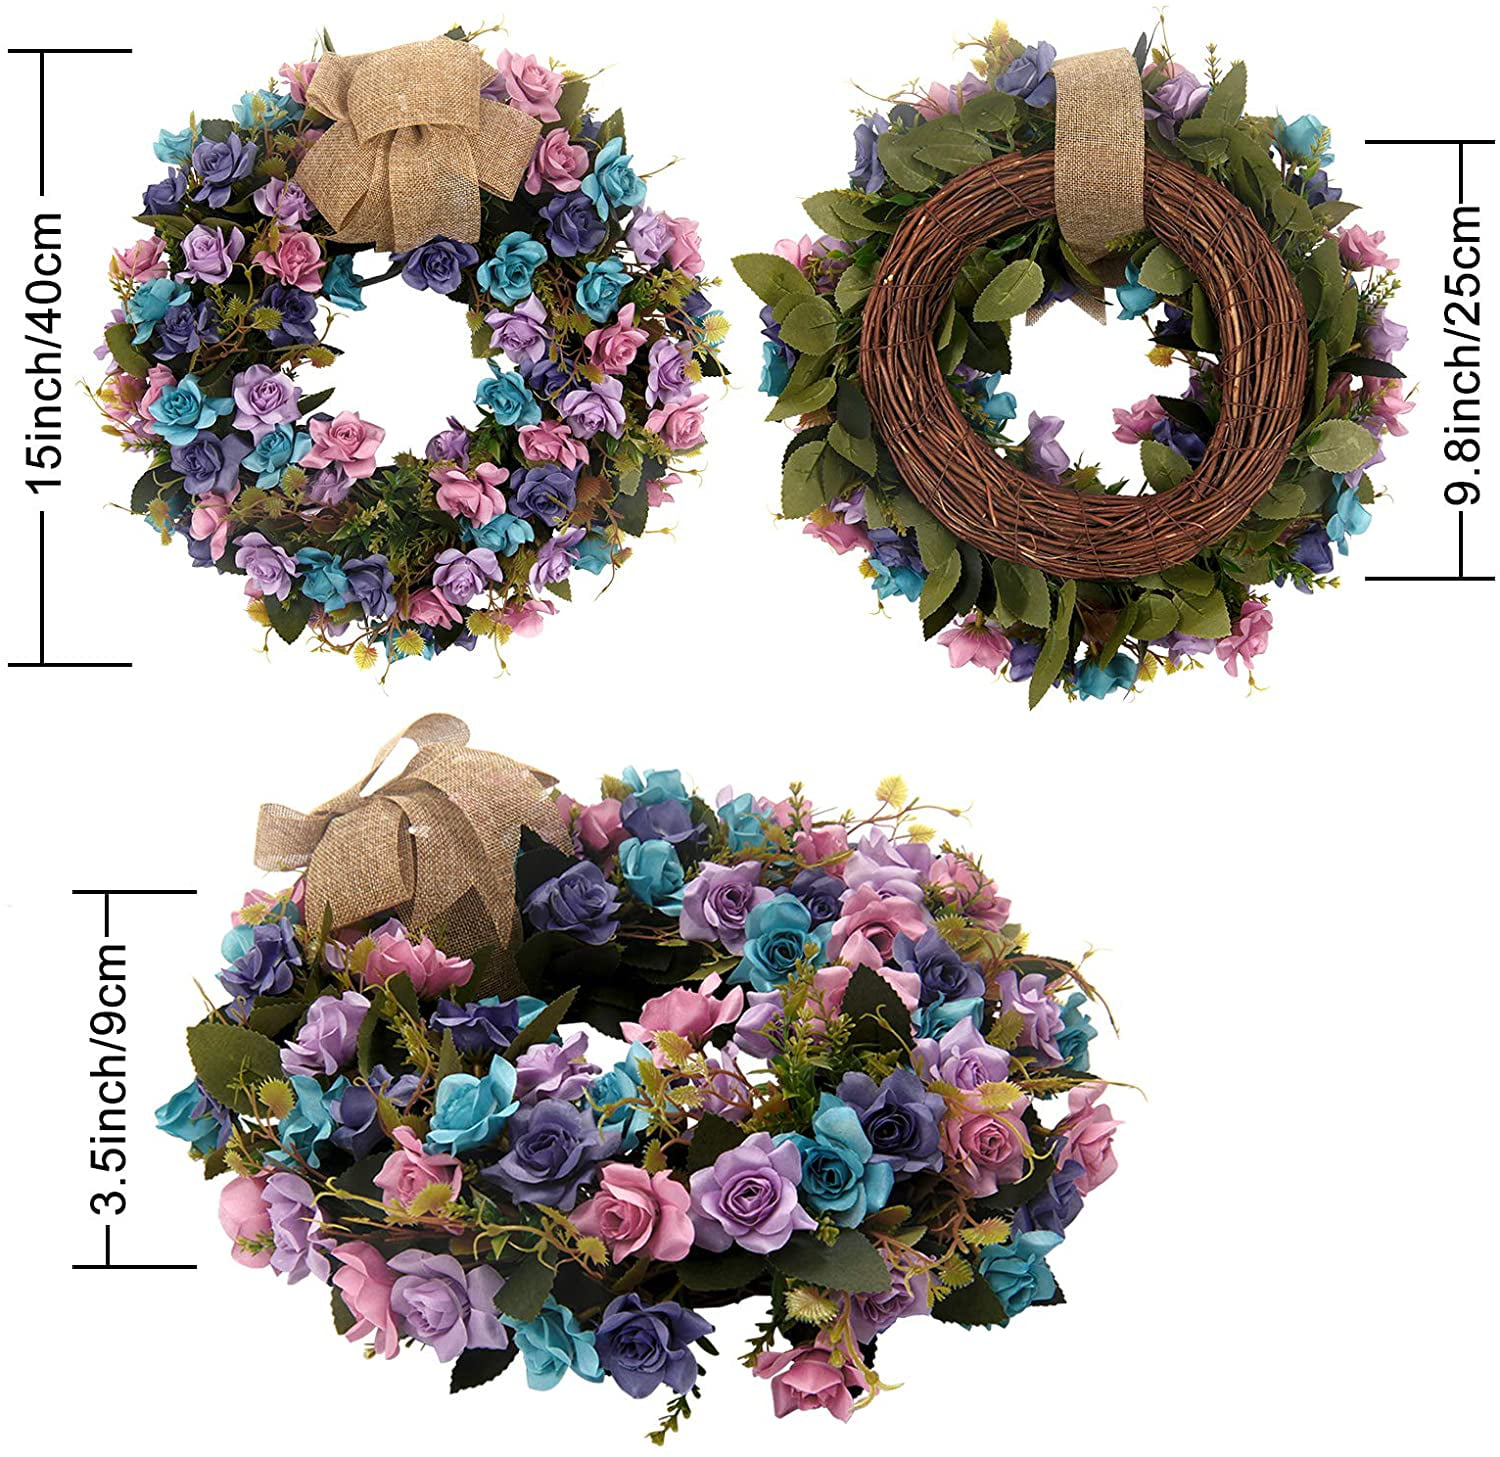 UArtlines 15 Artificial Wreath Hanging Rose Garland Swag for Indoor Outdoor Window Wall Wedding Party Decoration Floral Wreath, 15 Rose Blue/Purple